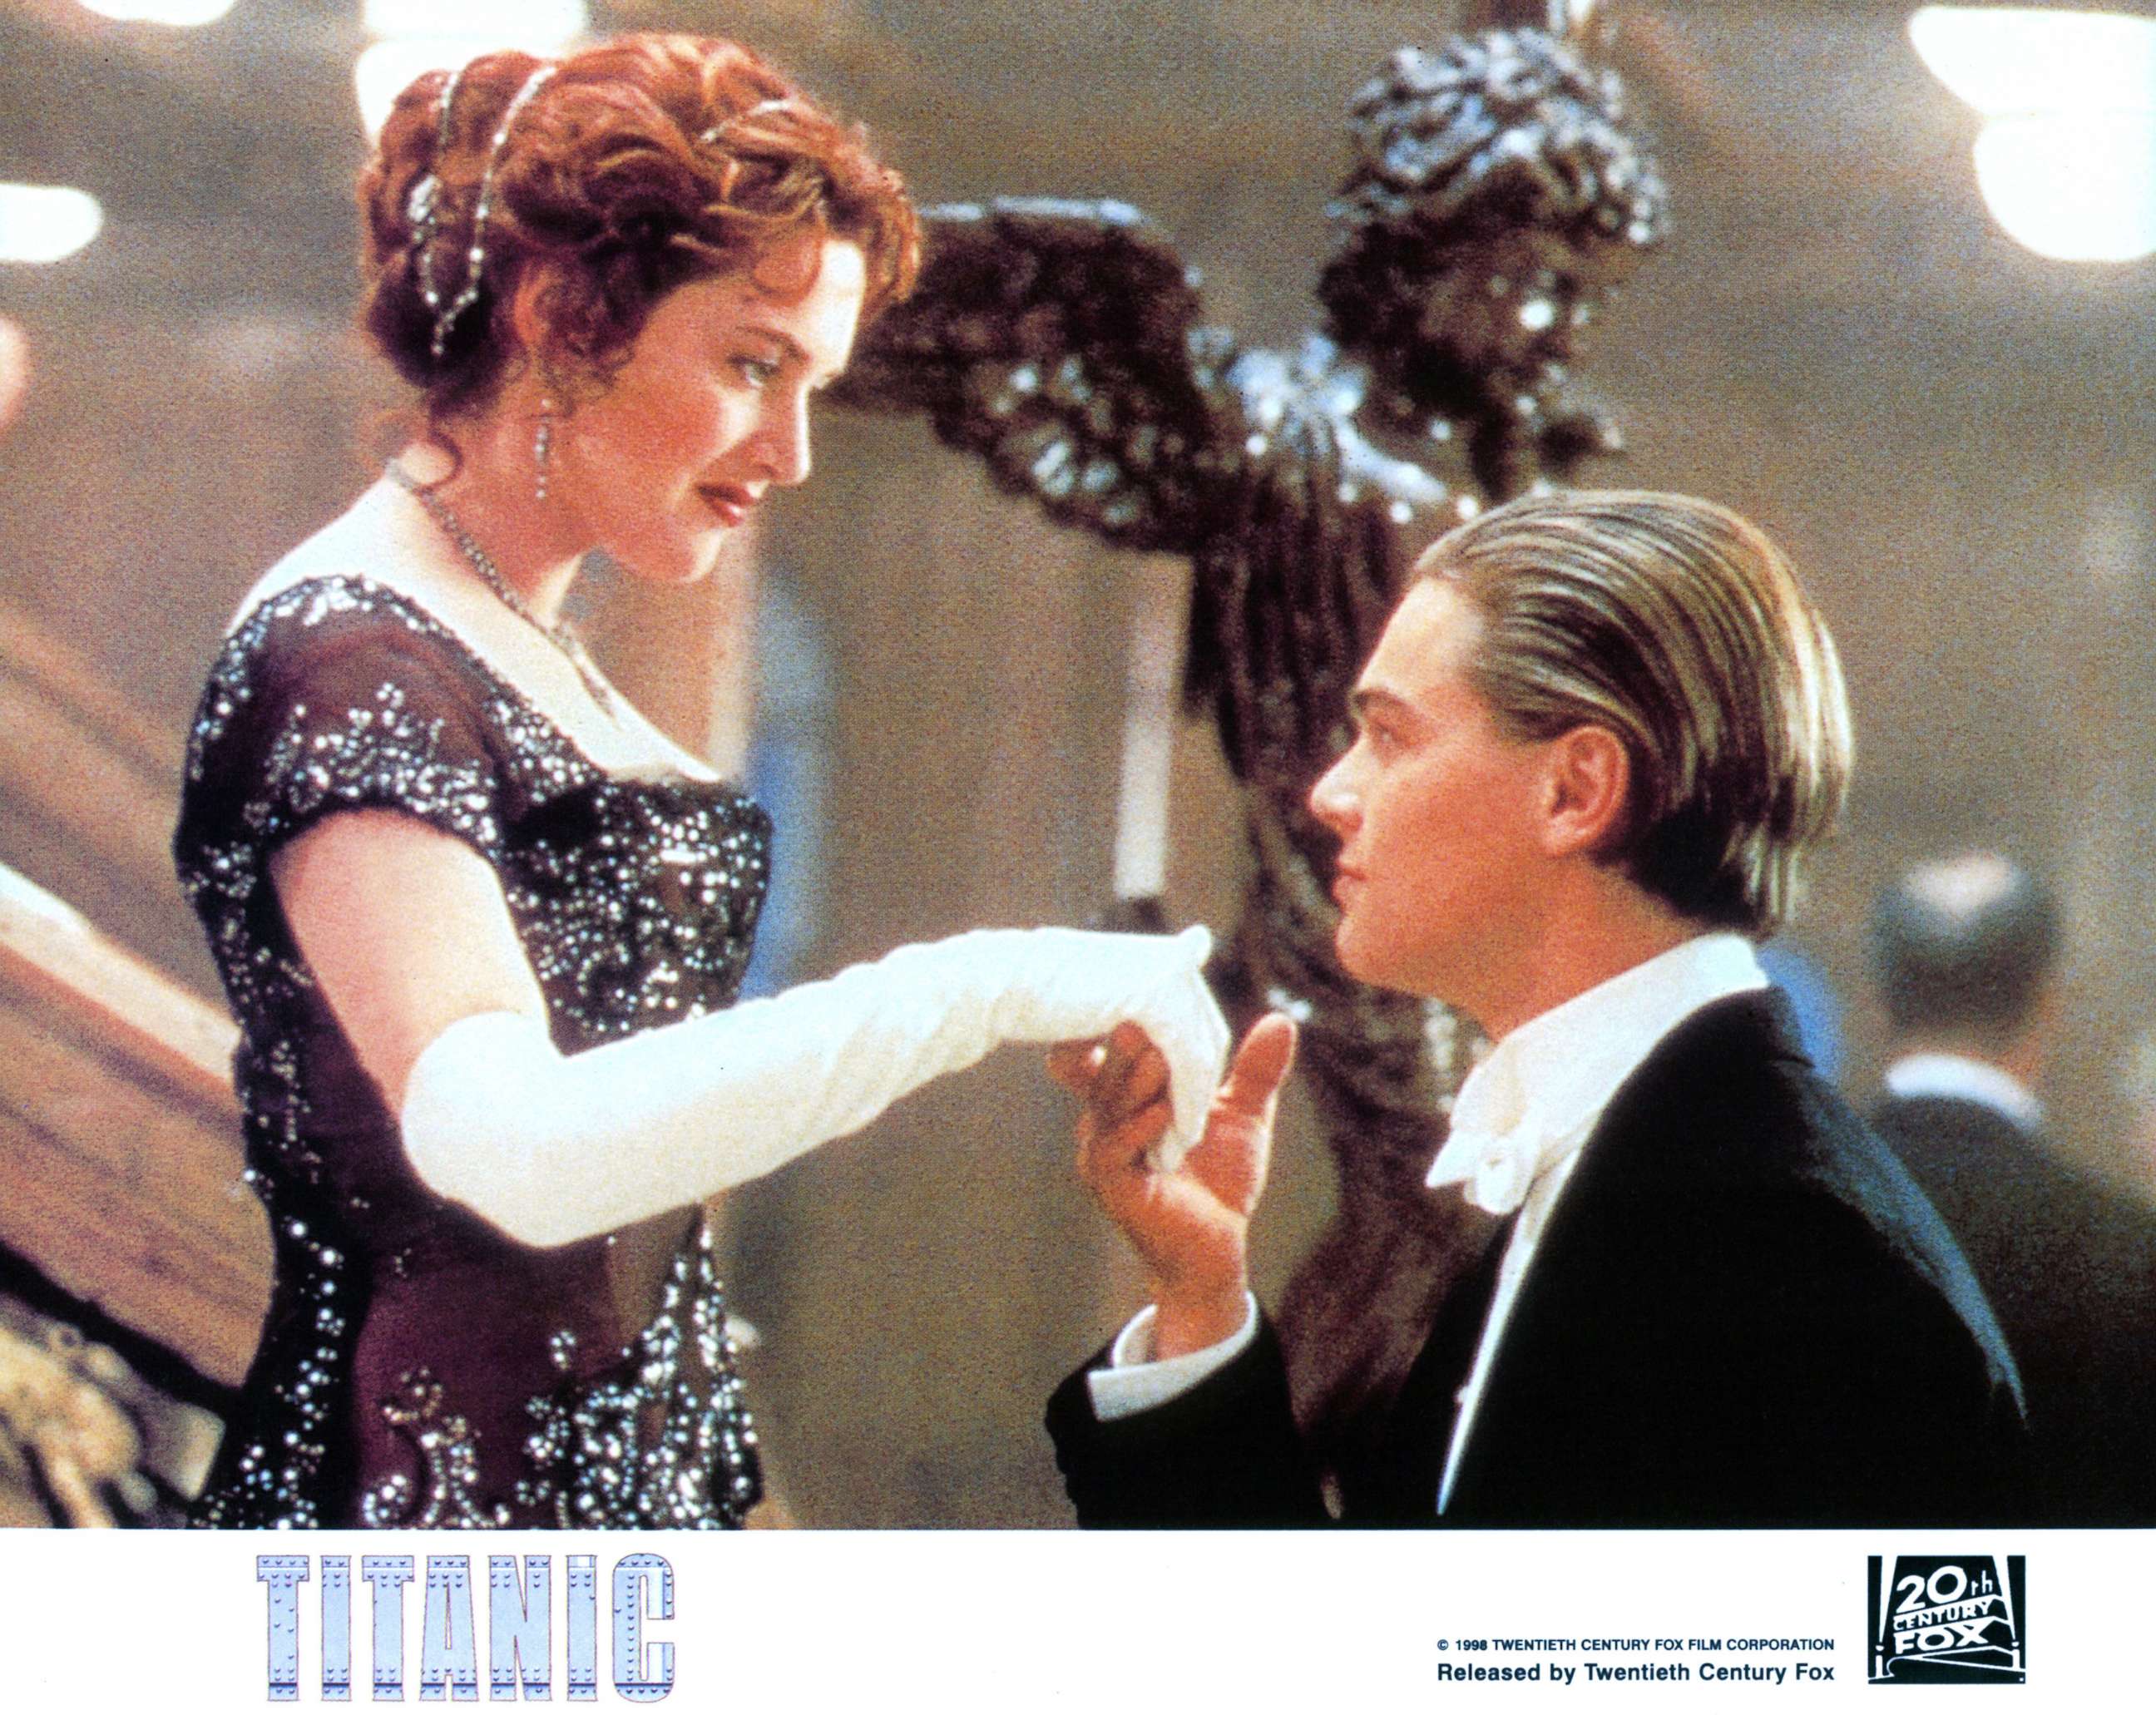 PHOTO: Kate Winslet offers her hand to Leonardo DiCaprio in a scene from the film 'Titanic', 1997.